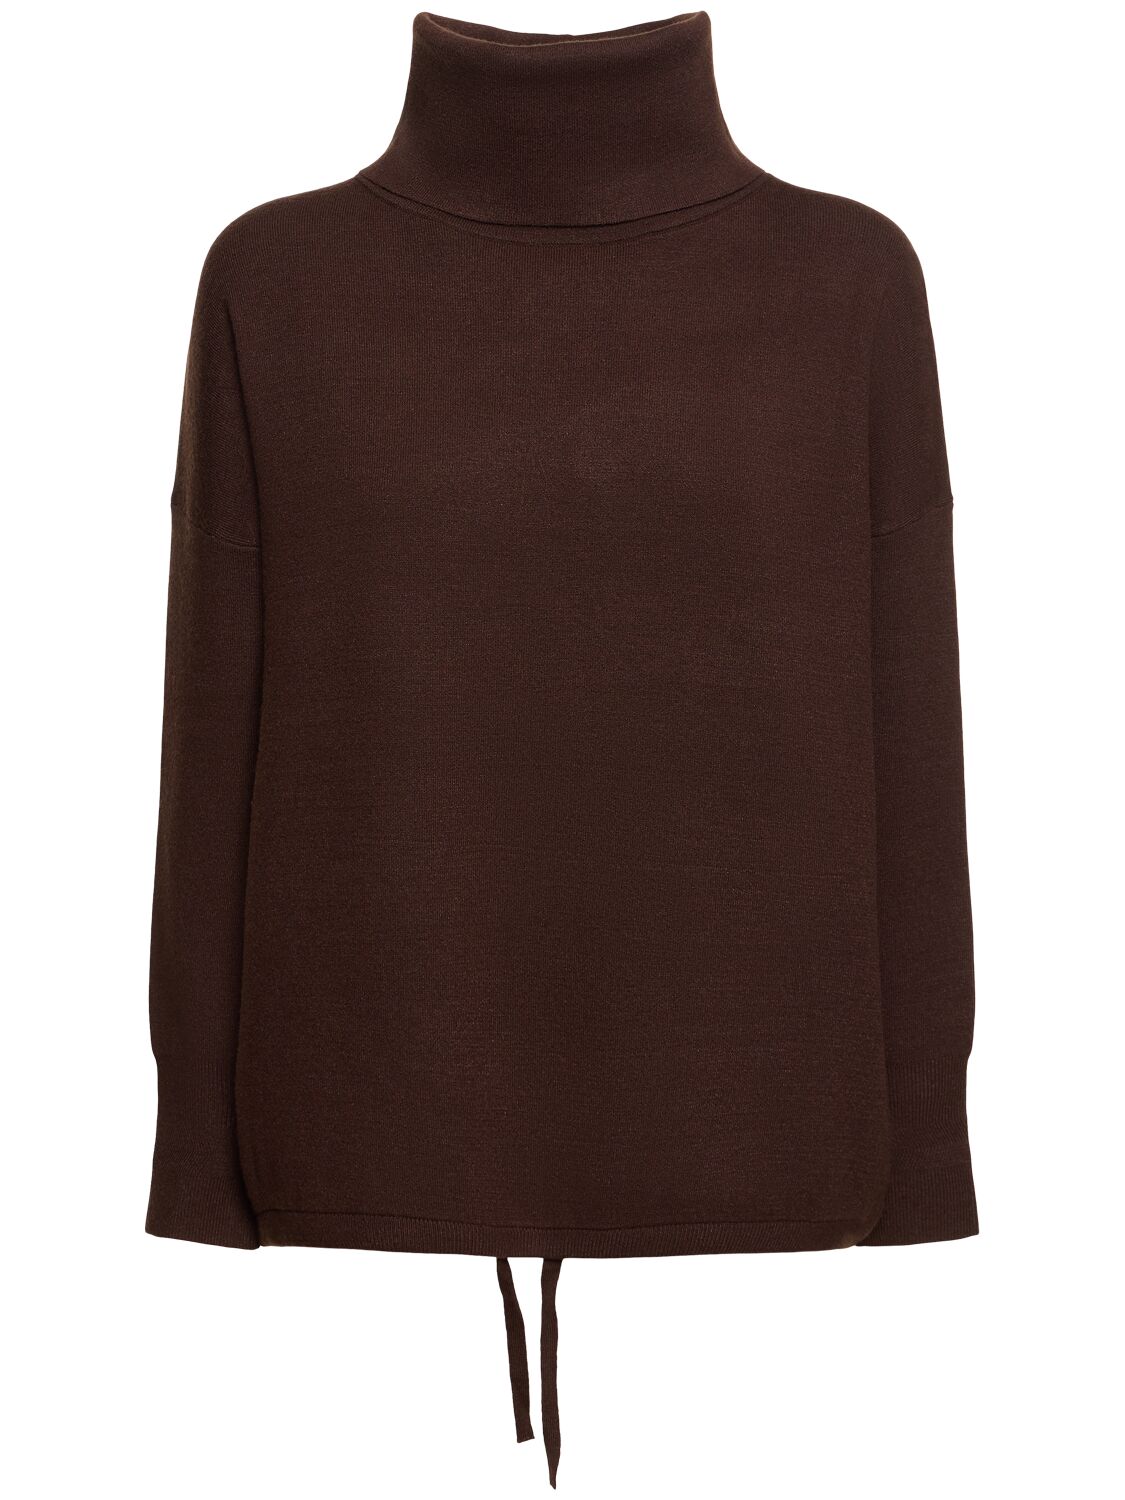 Varley Cavendish Roll Neck Knit Top In Brown